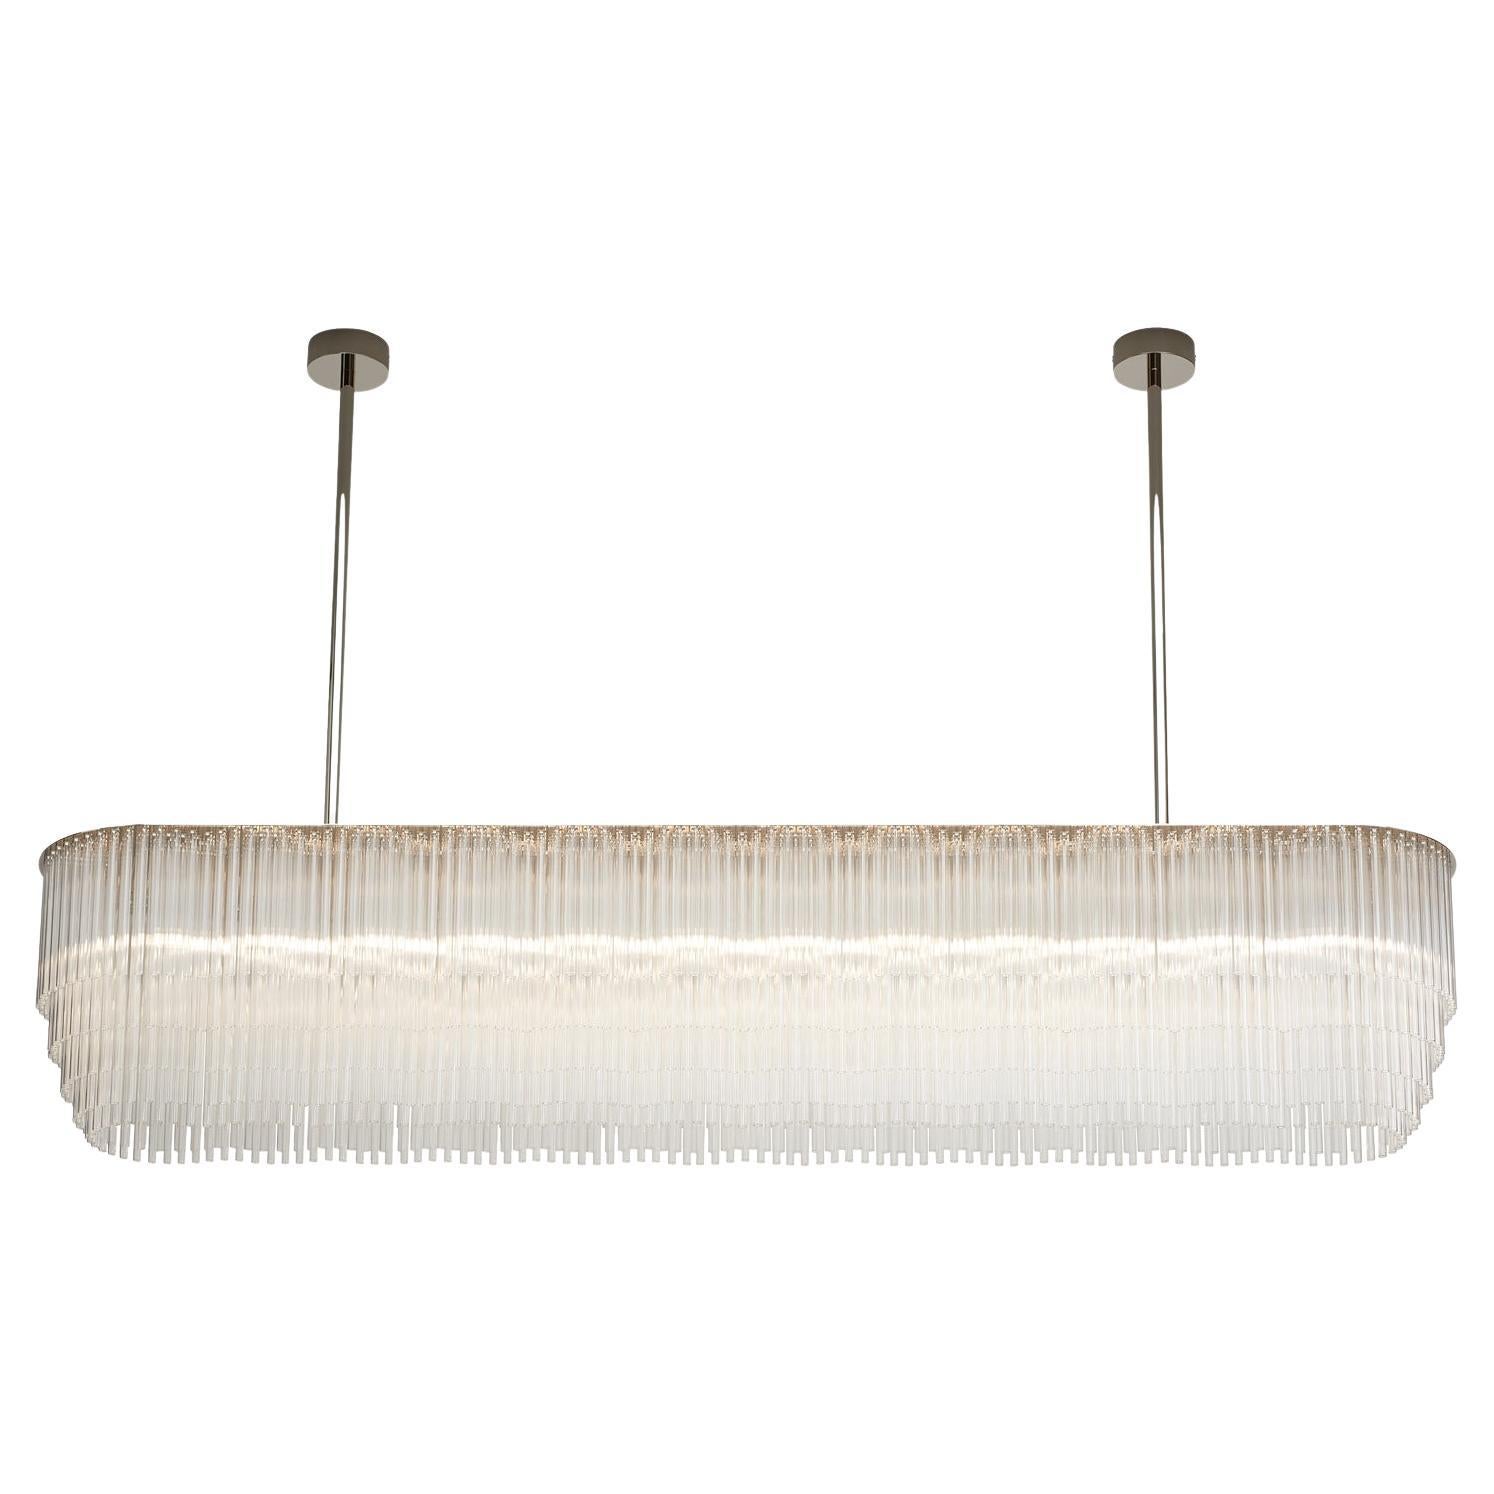 Linear Chandelier 1261mm / 25.75" in Polished Chrome with Tiered Glass Profile For Sale